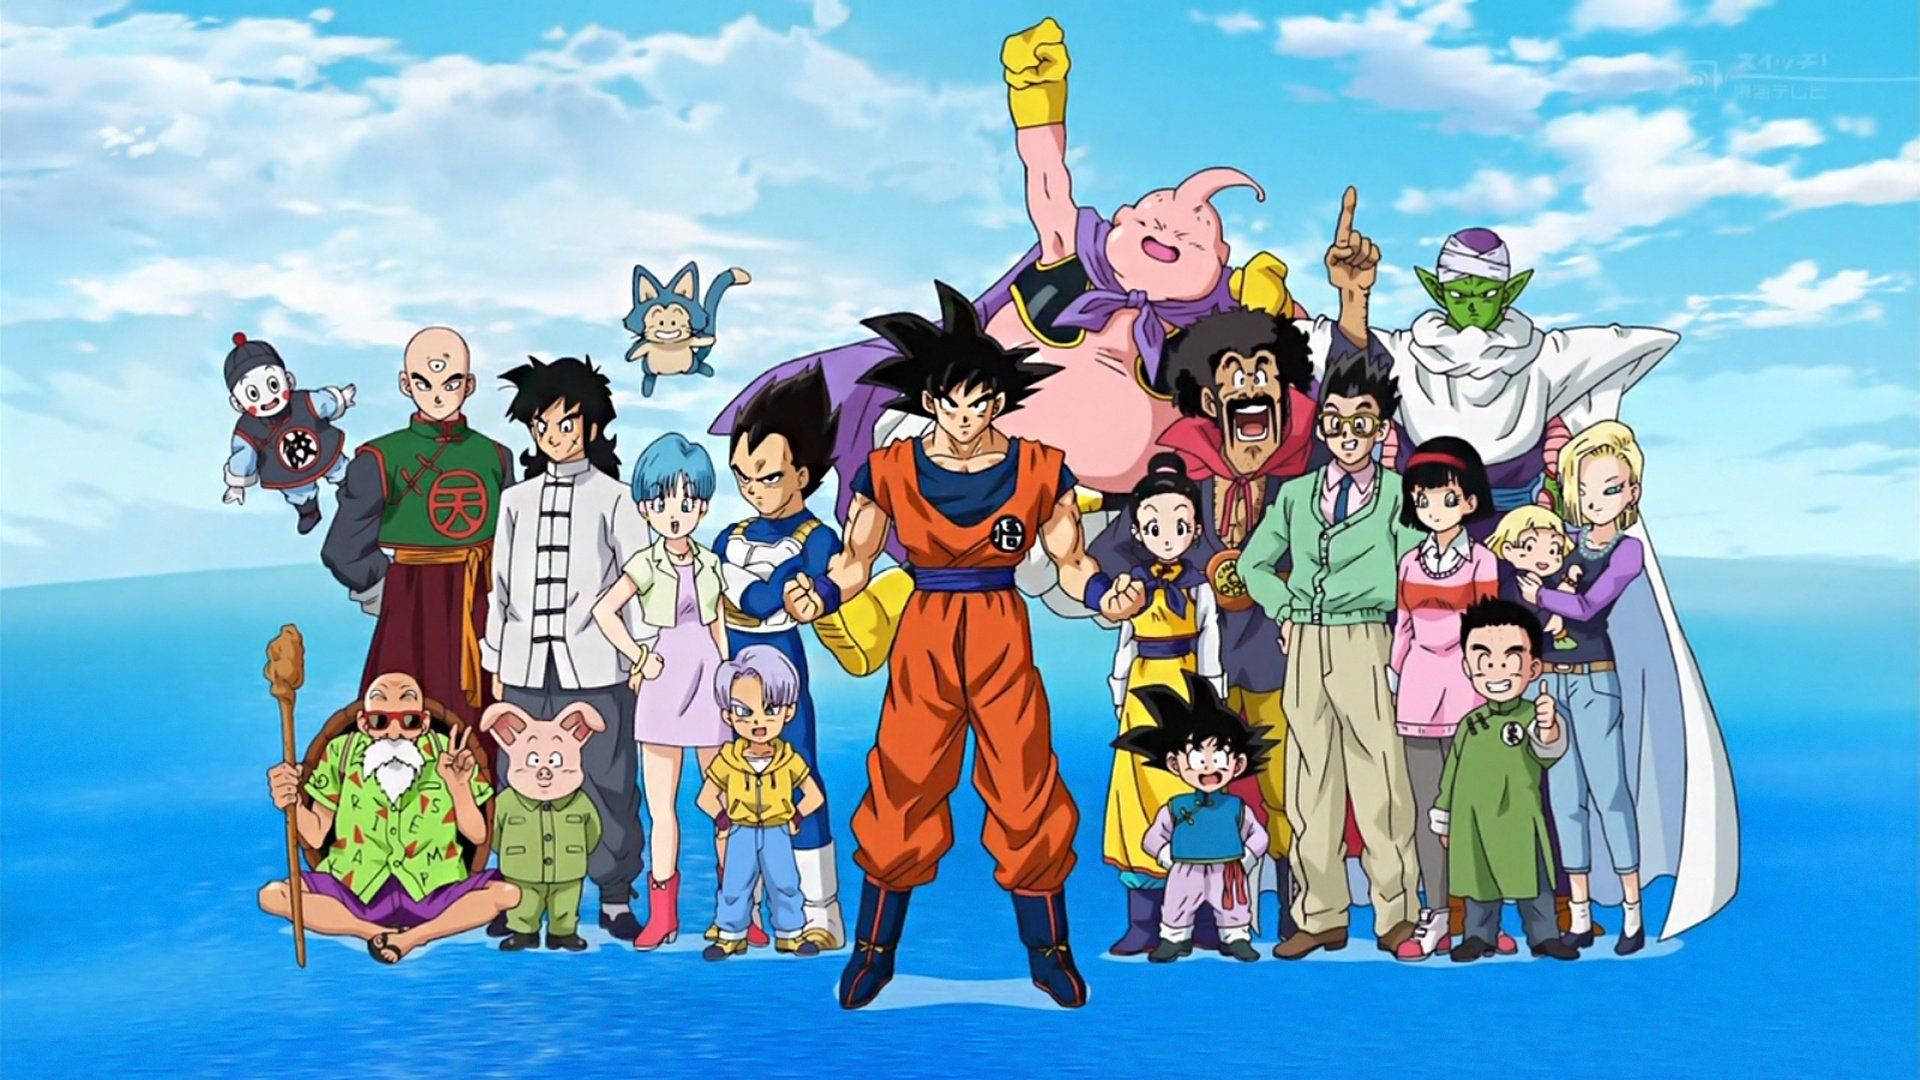 Dragon Ball 1920X1080 Wallpaper and Background Image